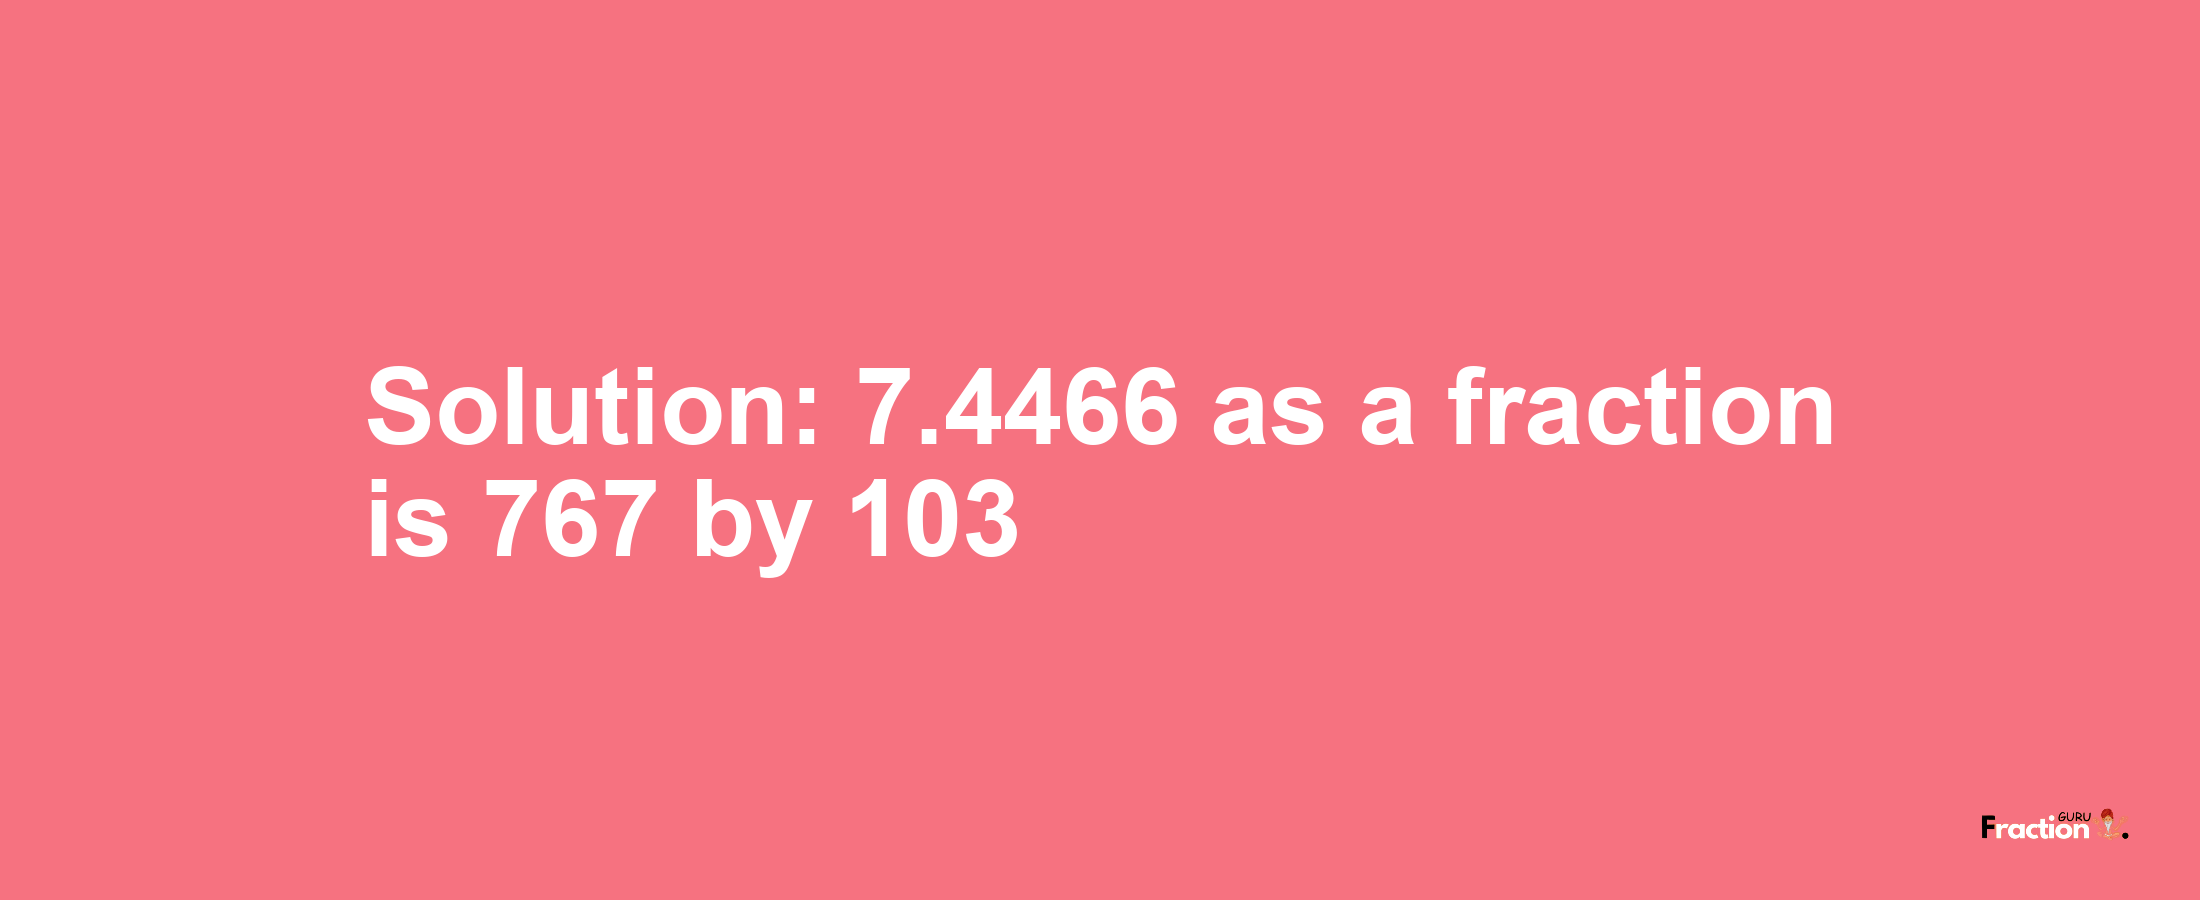 Solution:7.4466 as a fraction is 767/103